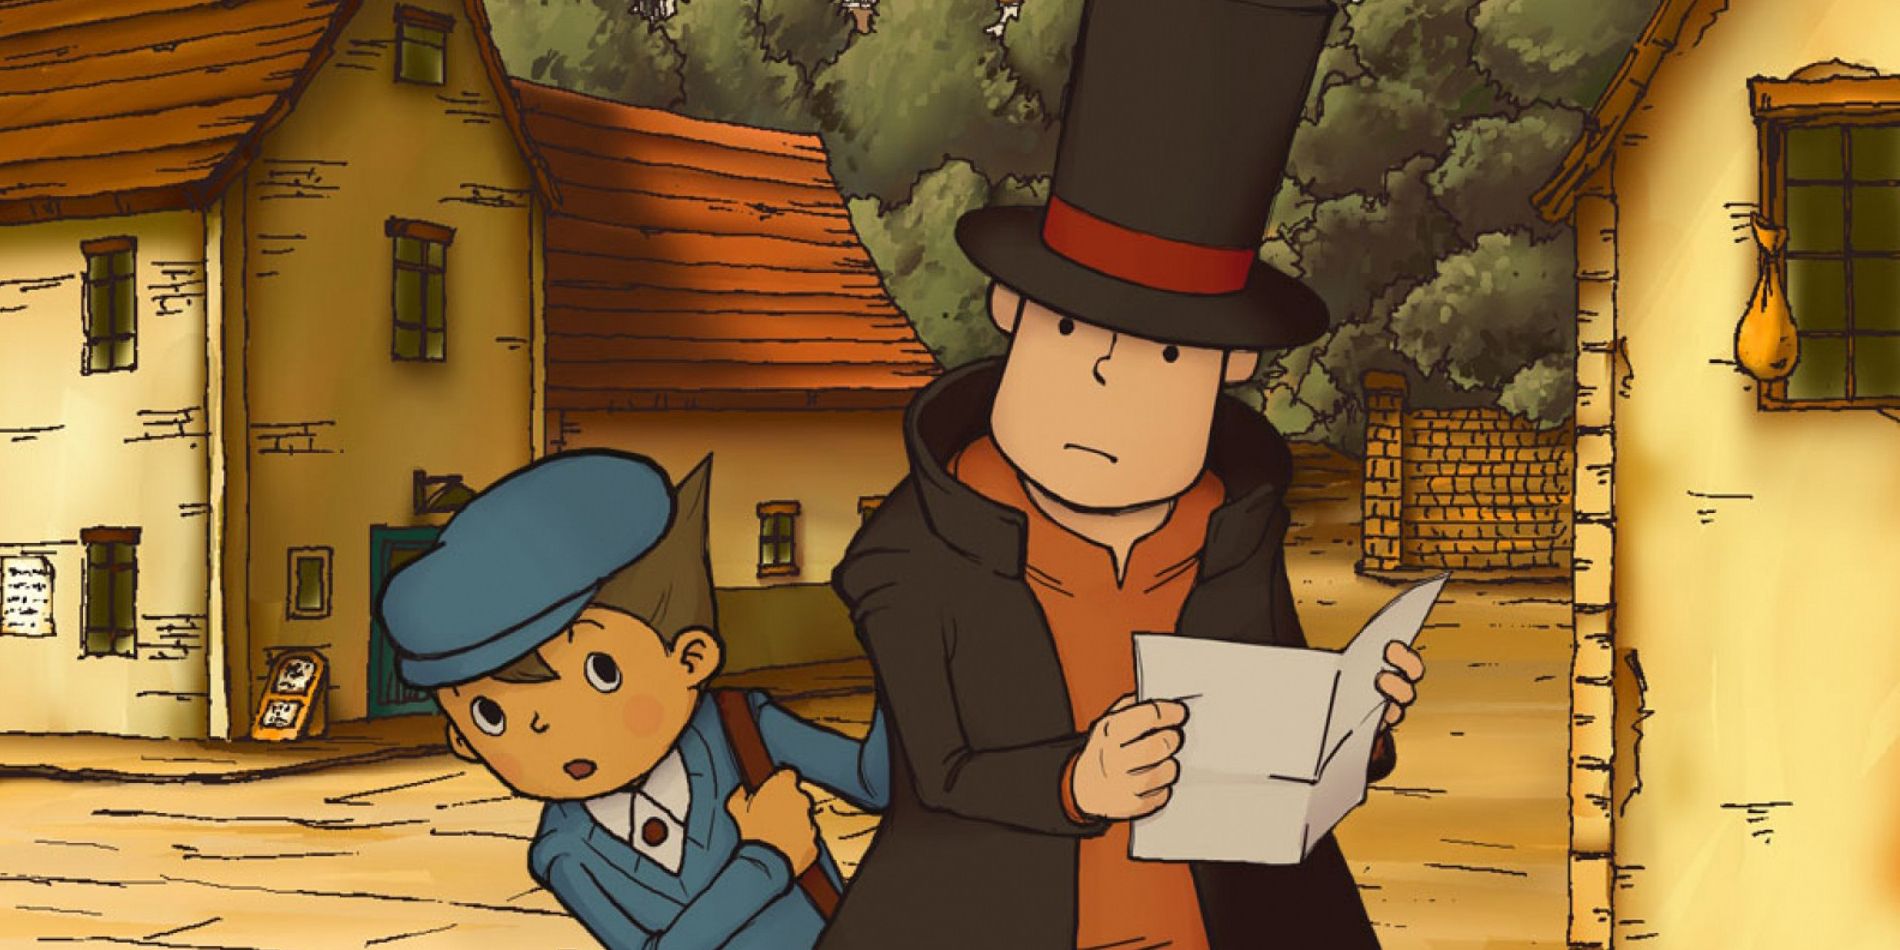 Professor Layton and the curious village